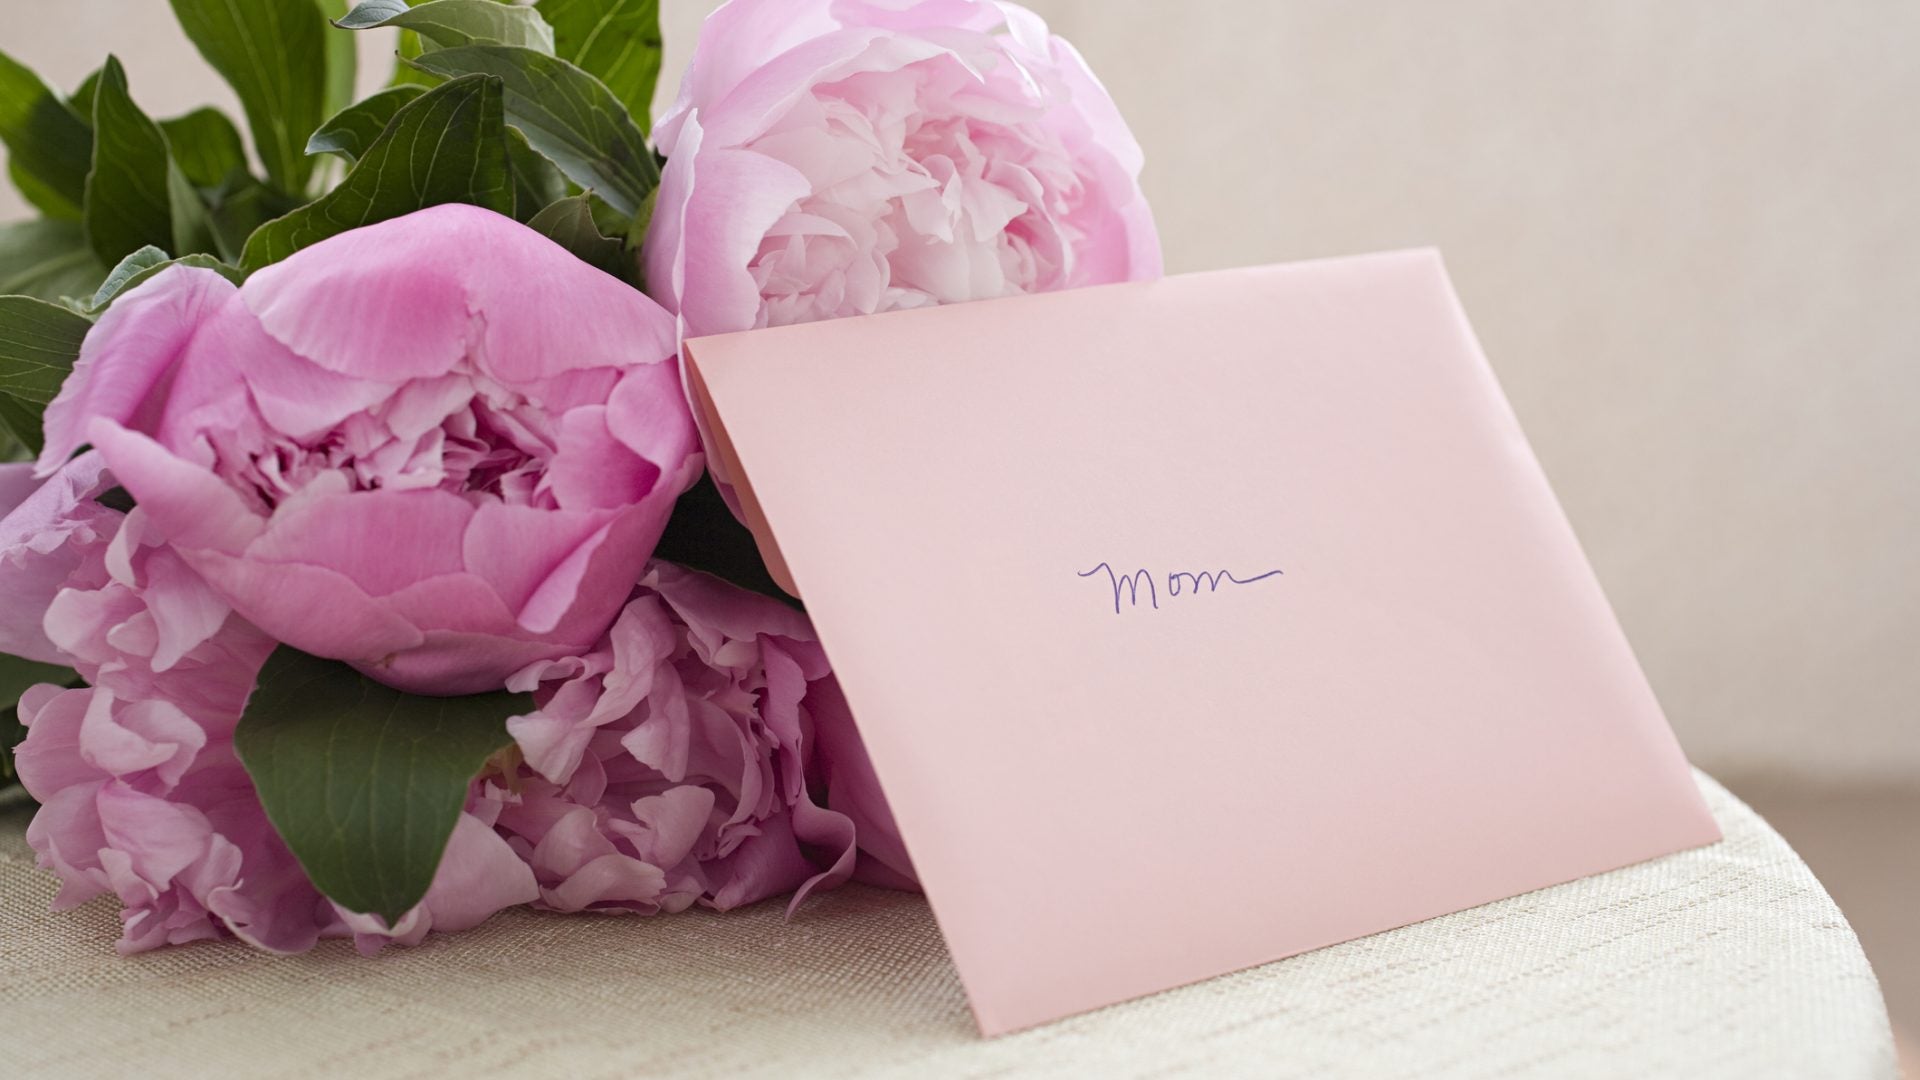 What The Moms In Your Life Actually Want For Mother's Day